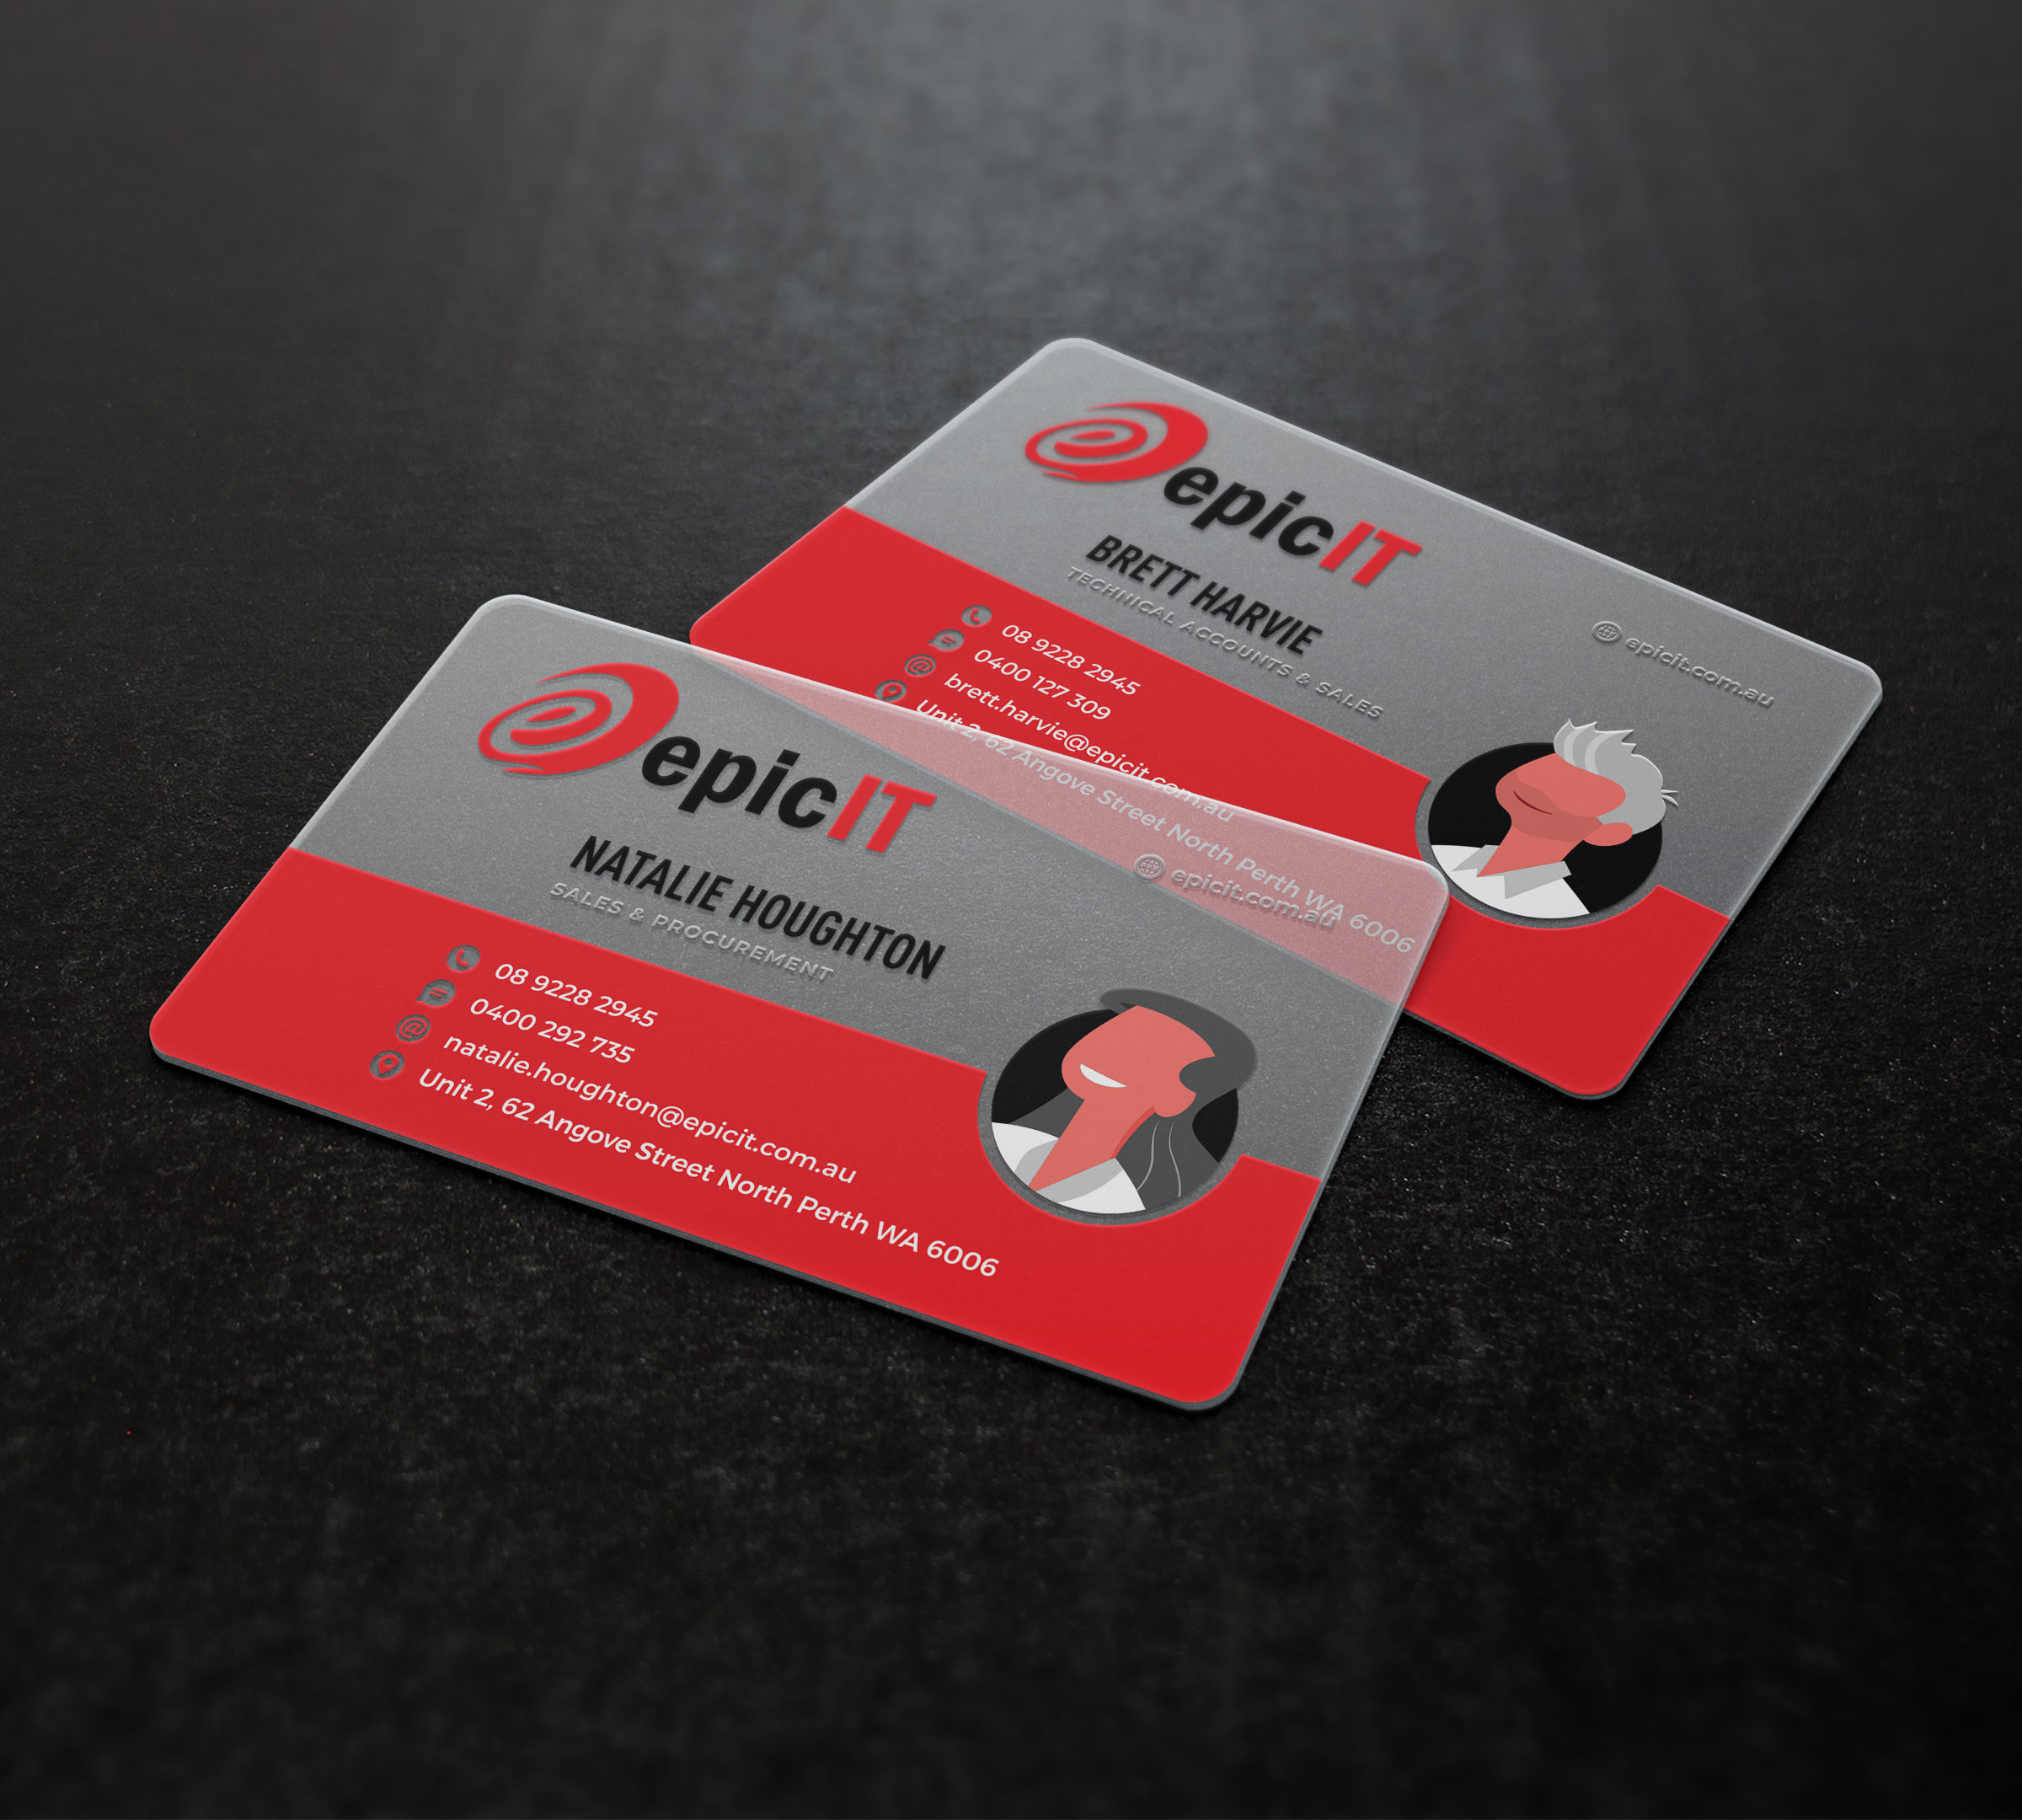 Epic IT Business Cards